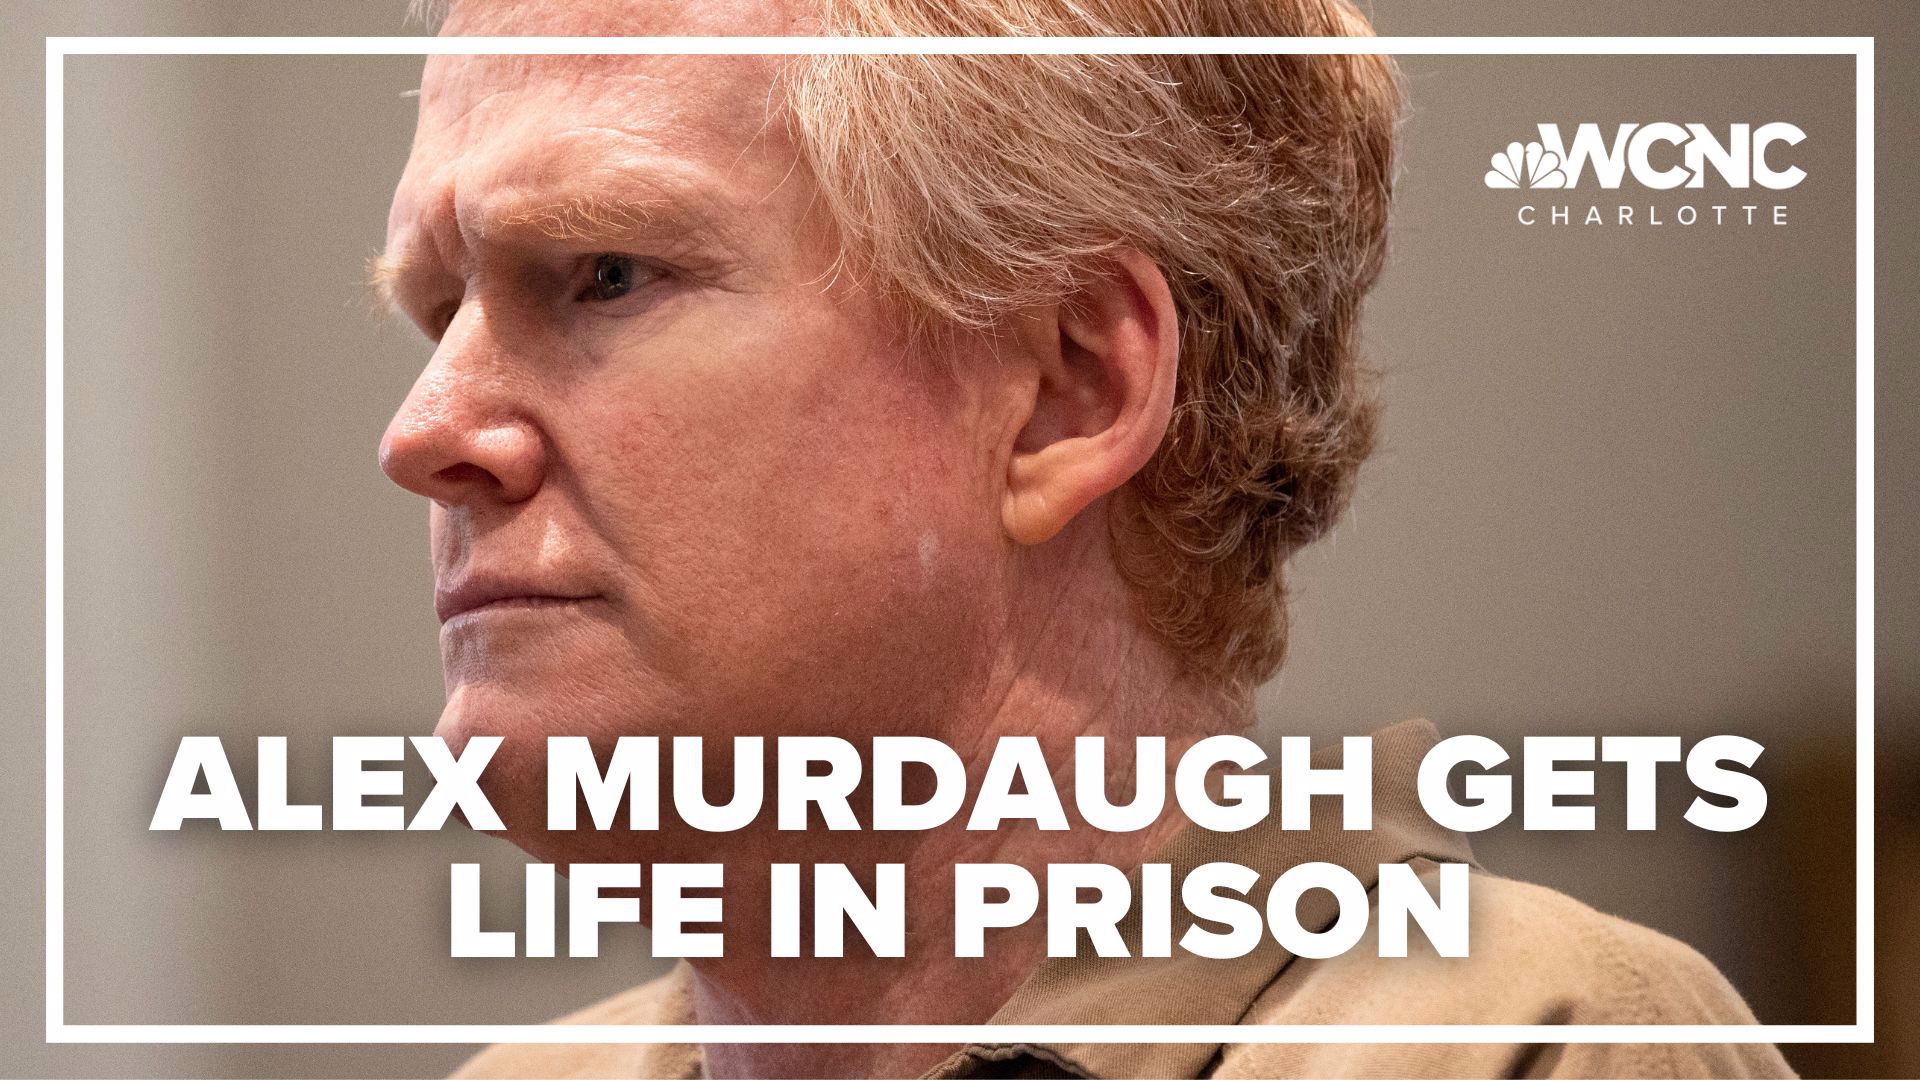 Alex Murdaugh received two consecutive life sentences for the murders of his wife Maggie and adult son Paul on June 7, 2021.